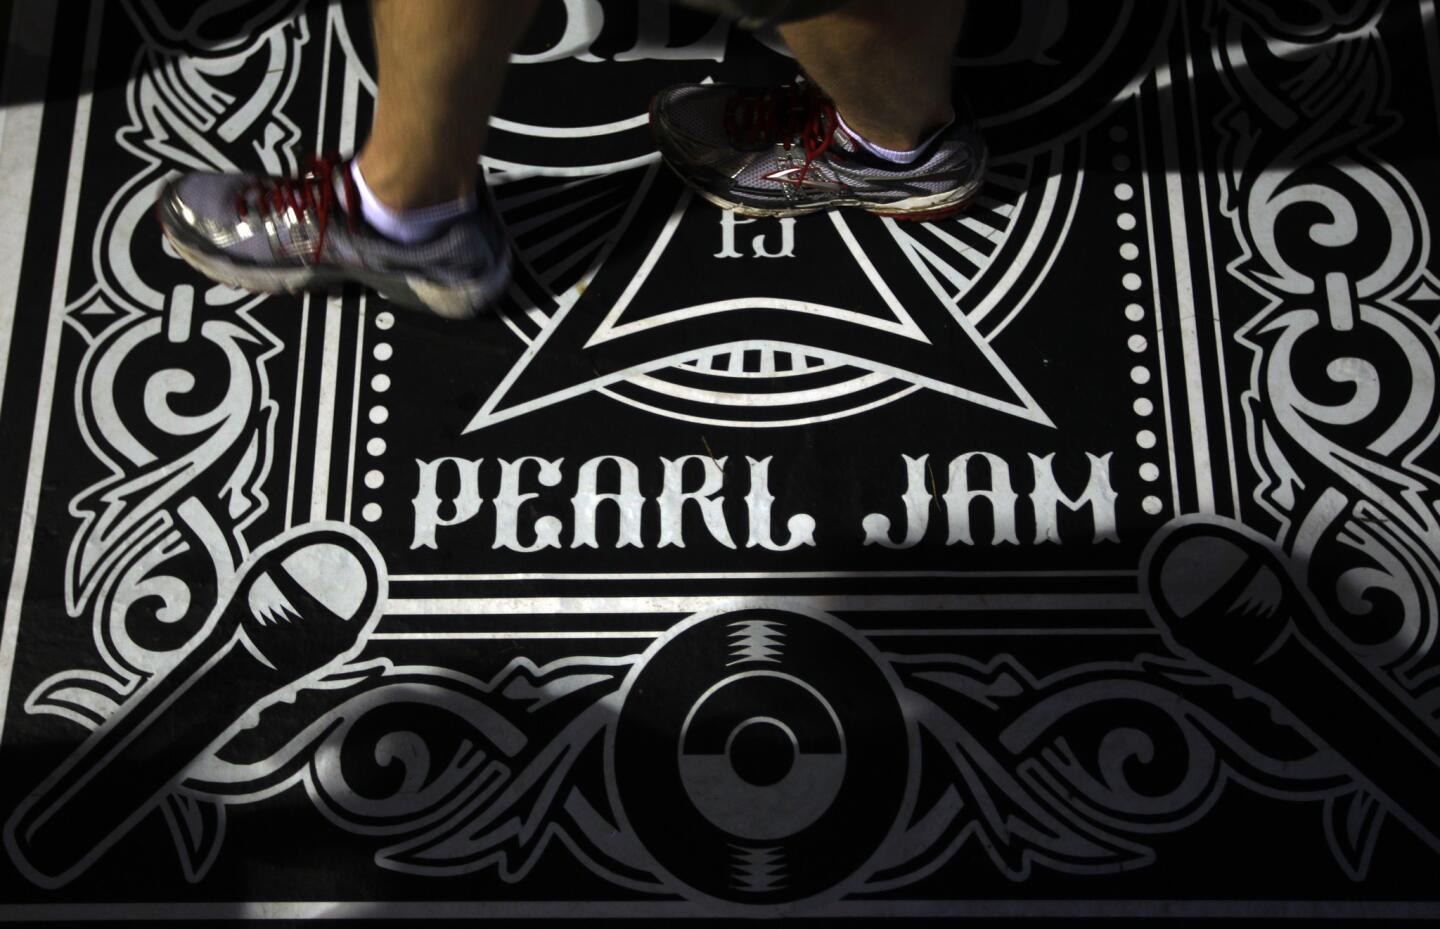 A fan walks on a Pearl Jam designed floor covering while attending the band's 20th anniversary tour at Alpine Valley in East Troy, Wisconsin, on Saturday, September 3, 2011.